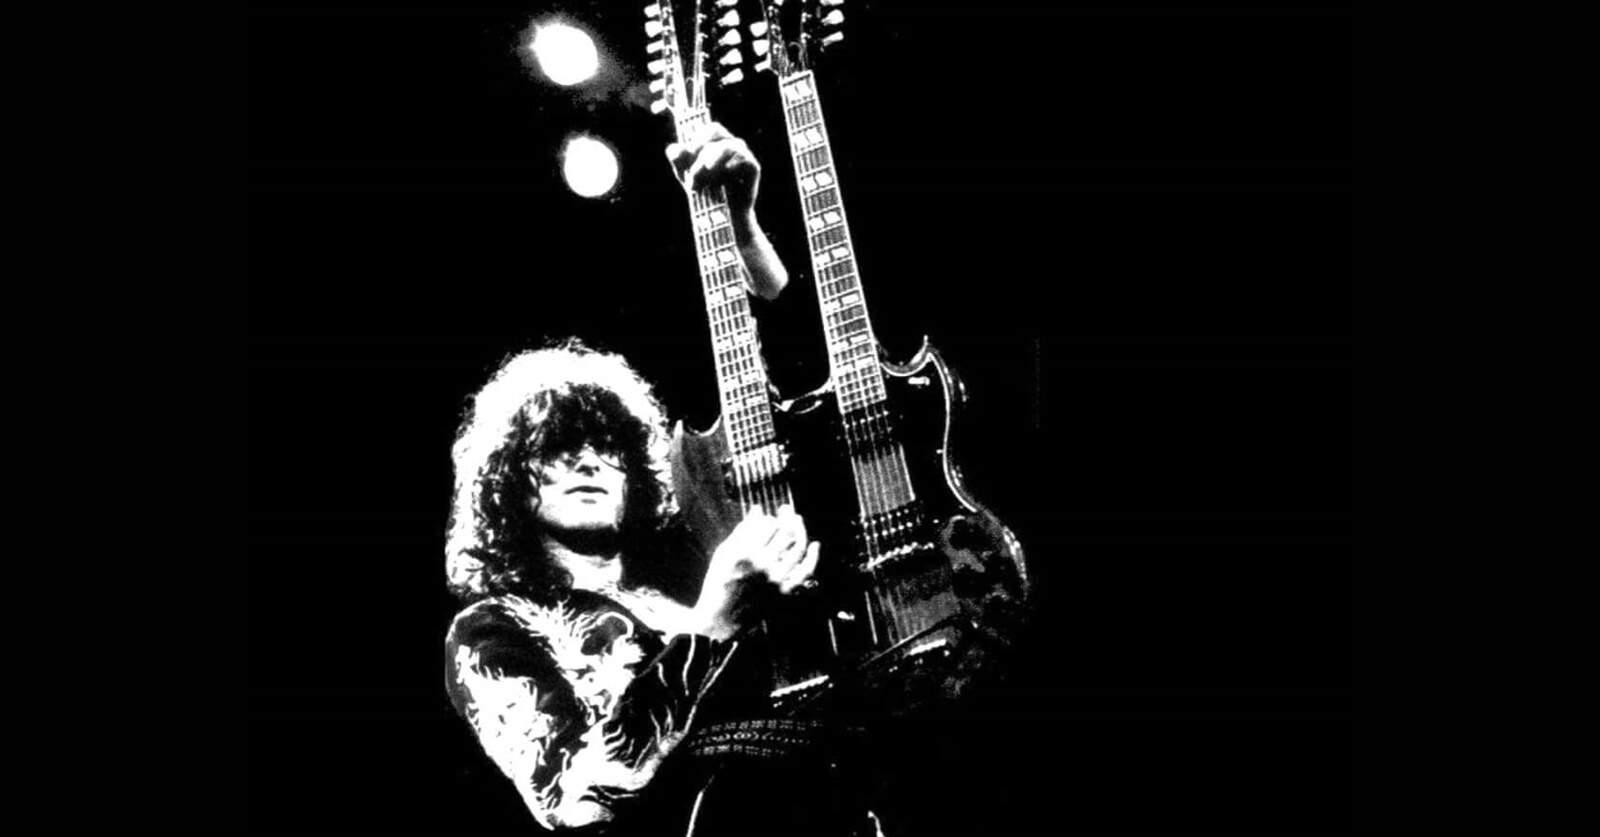 The history behind the Legendary guitarist and Led Zeppelin founder.
